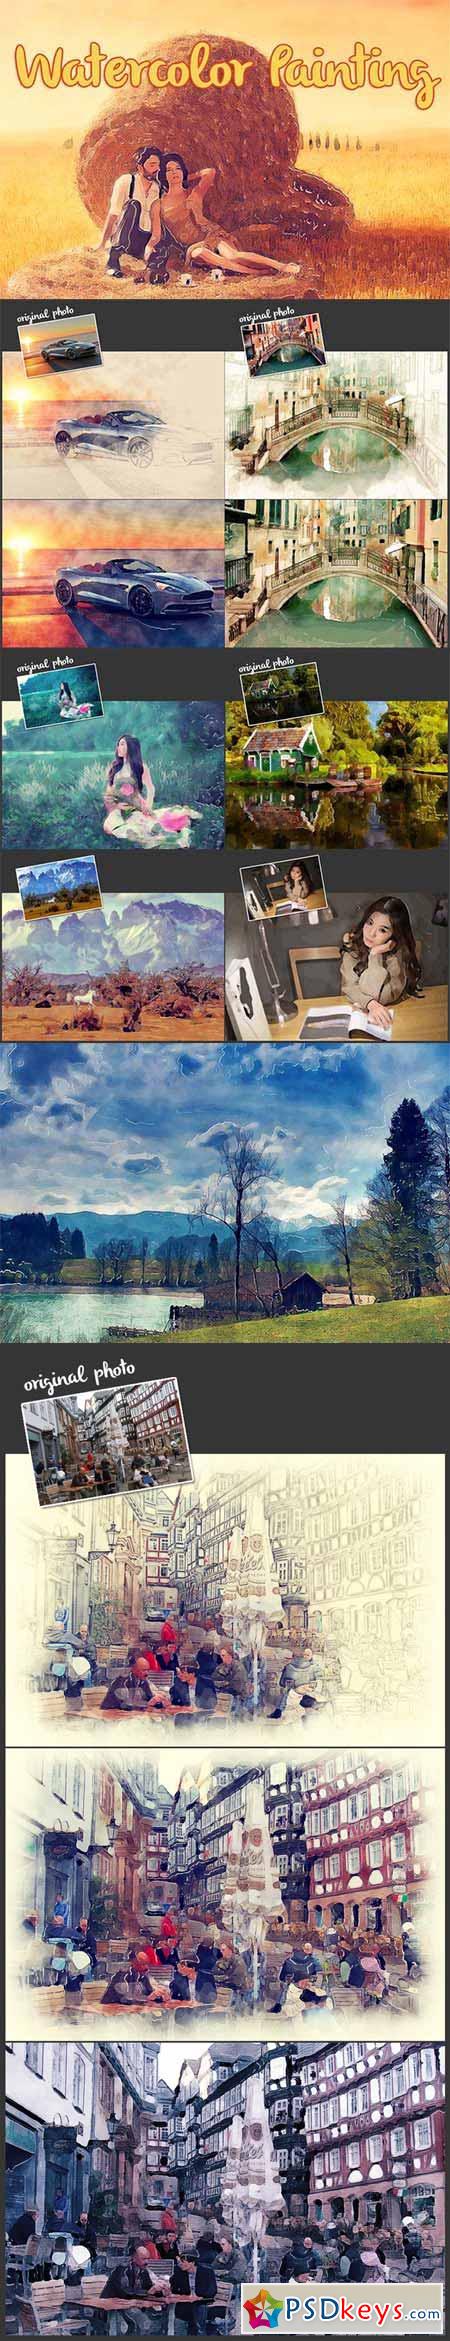 Watercolor Painting Photoshop action 318439